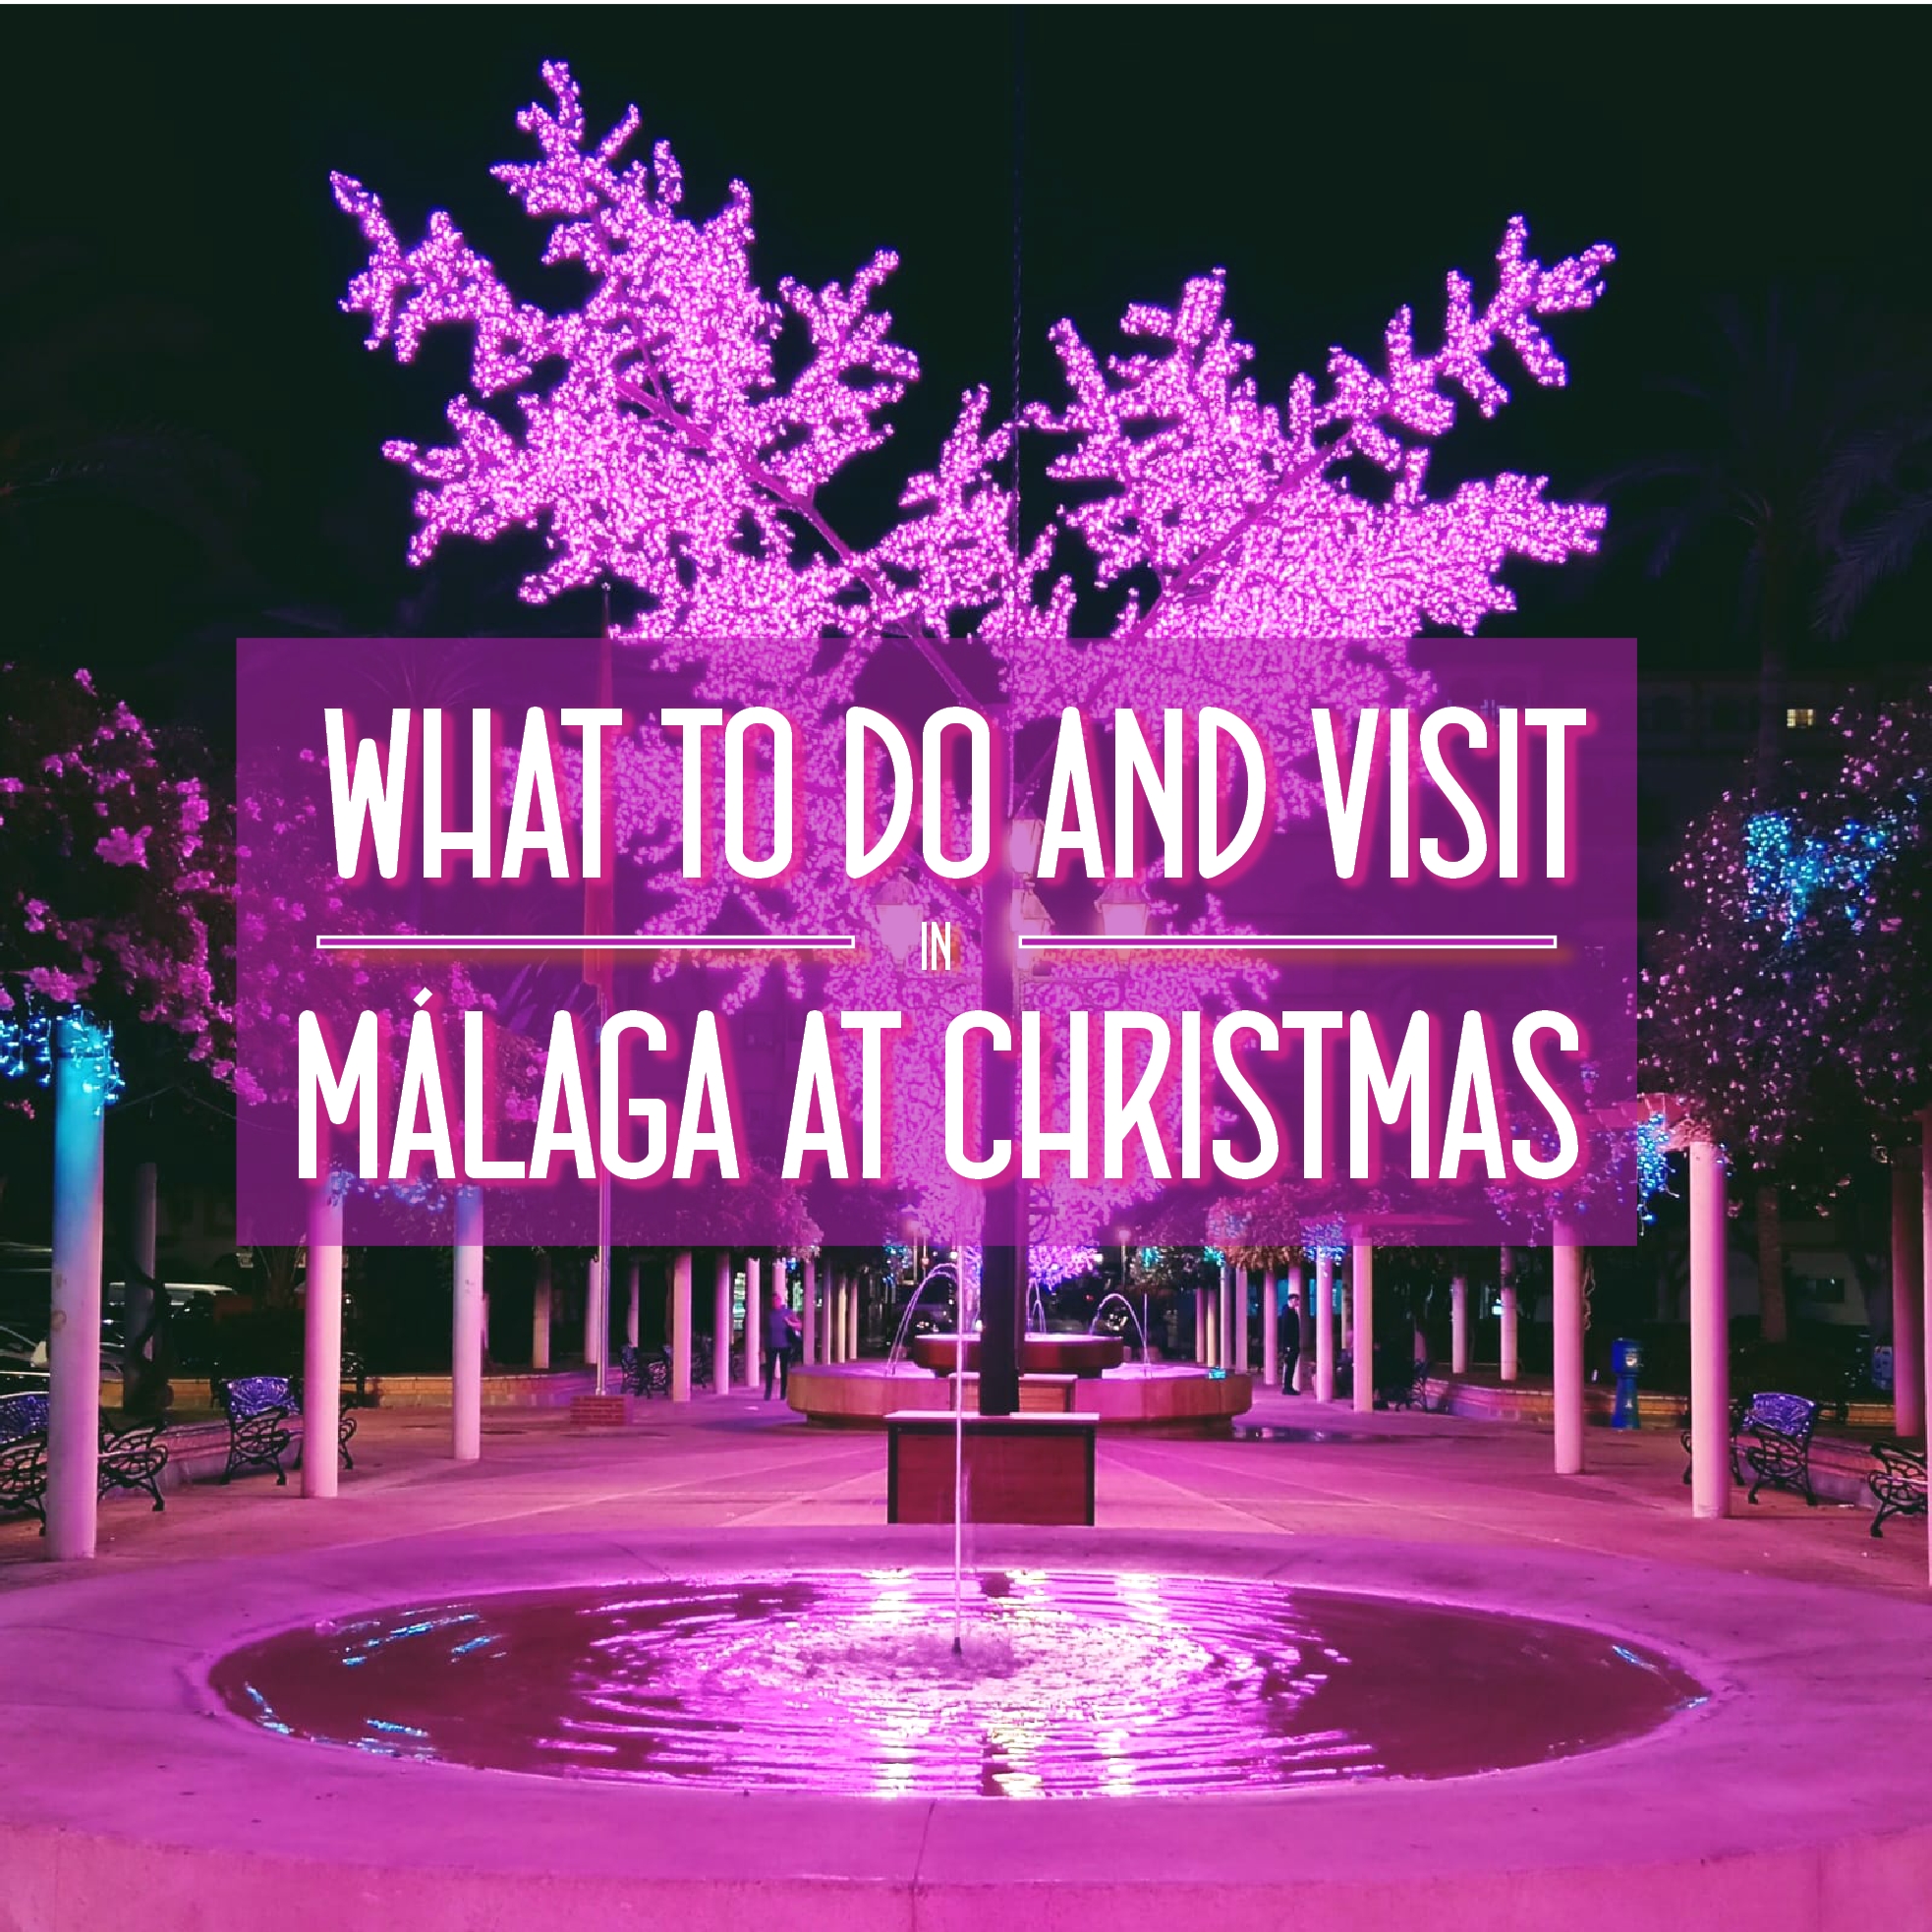 What to do and visit at Christmas in Malaga